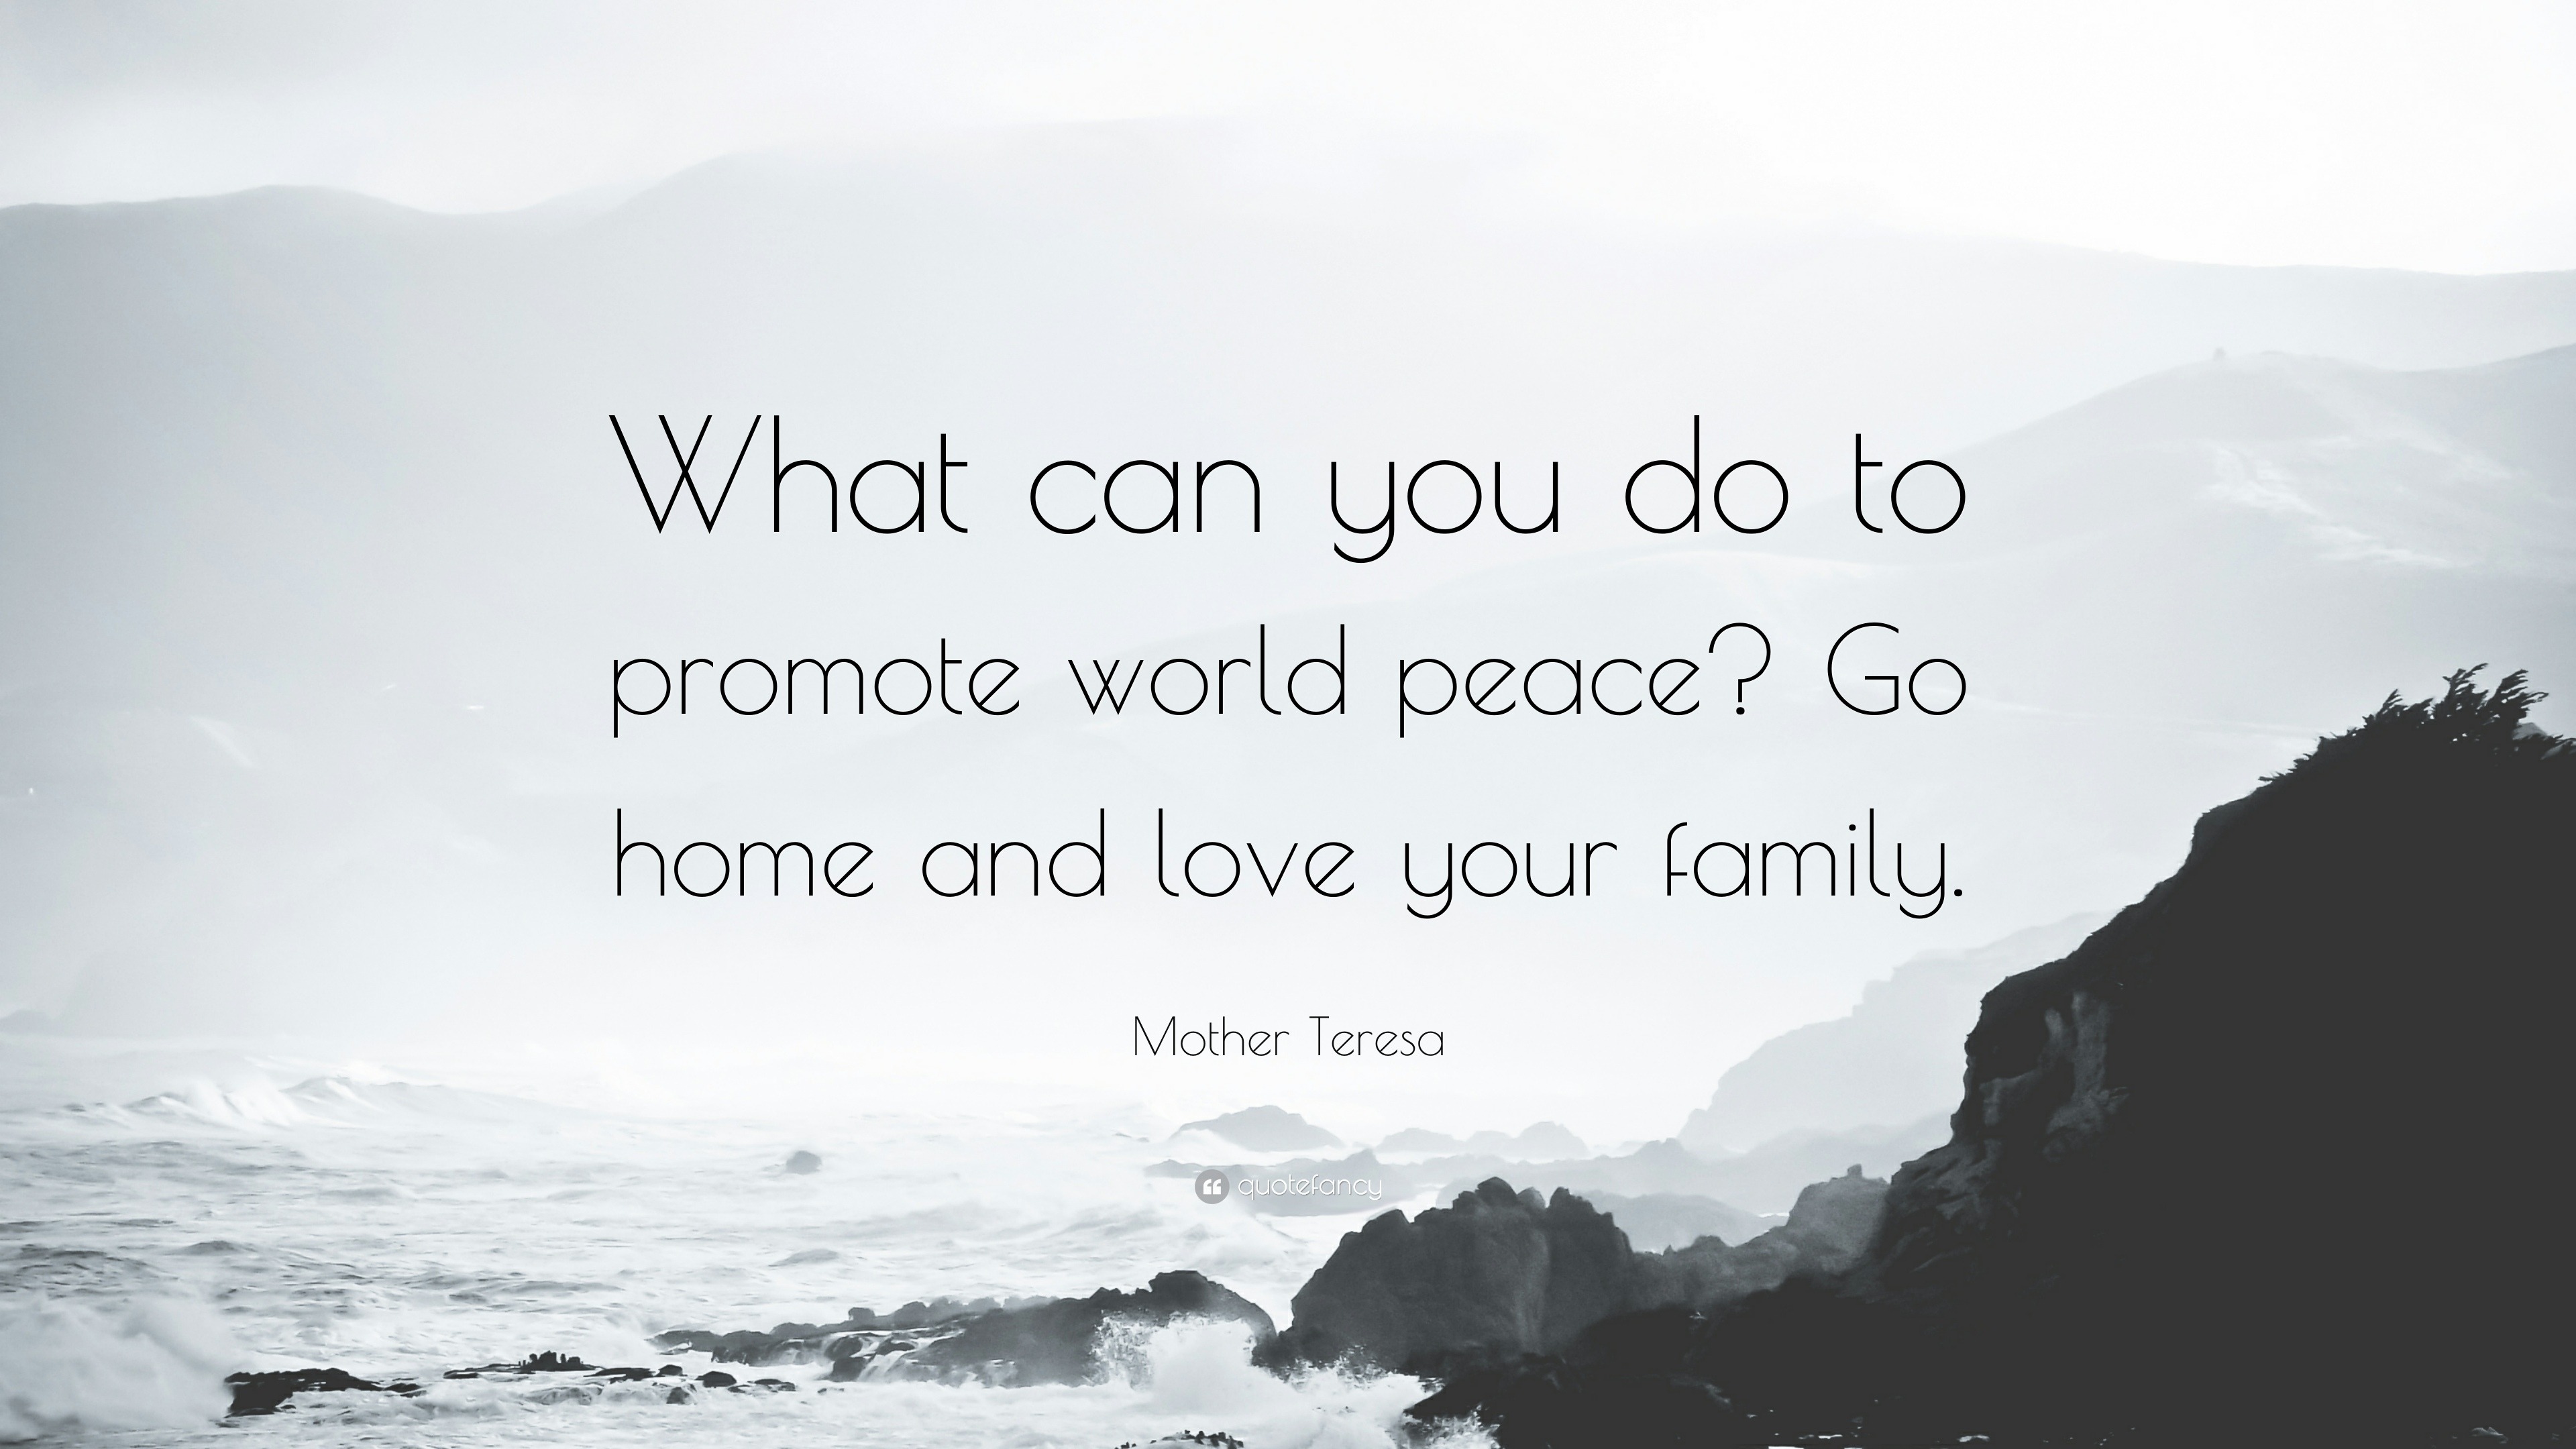 Mother Teresa Quote “What can you do to promote world peace Go home